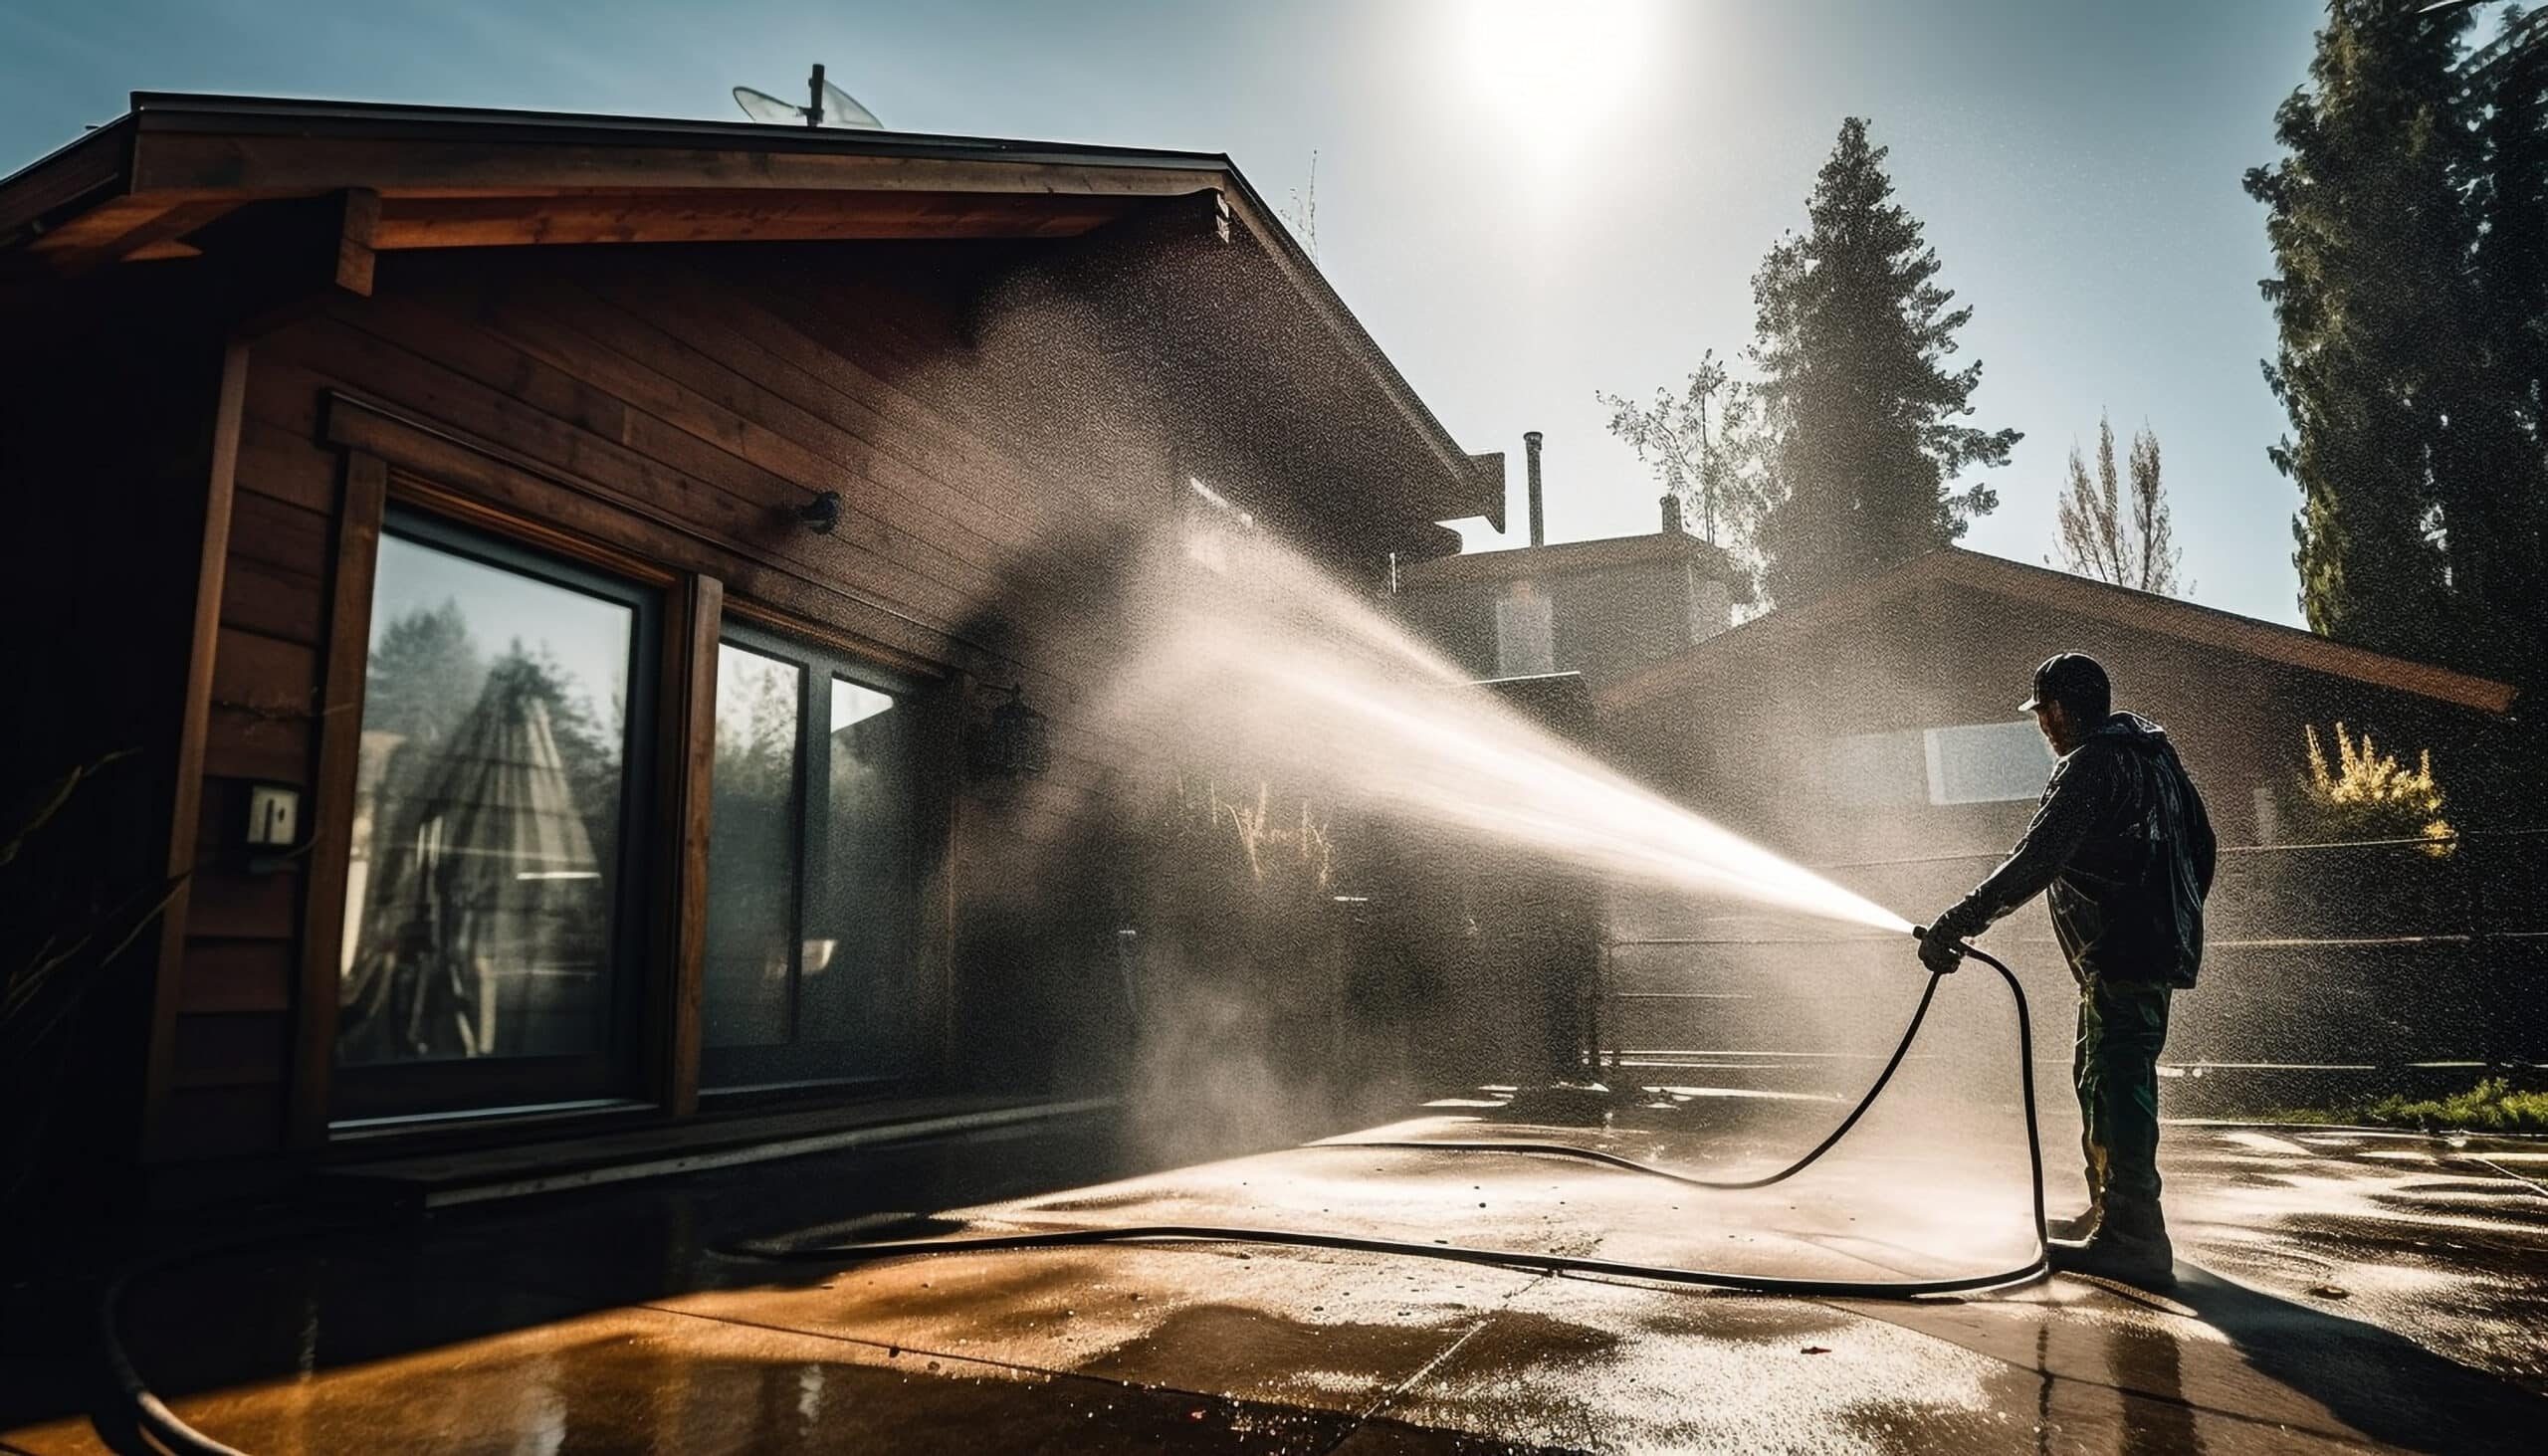 www.appr.com : Can I use hot water with an electric pressure washer?